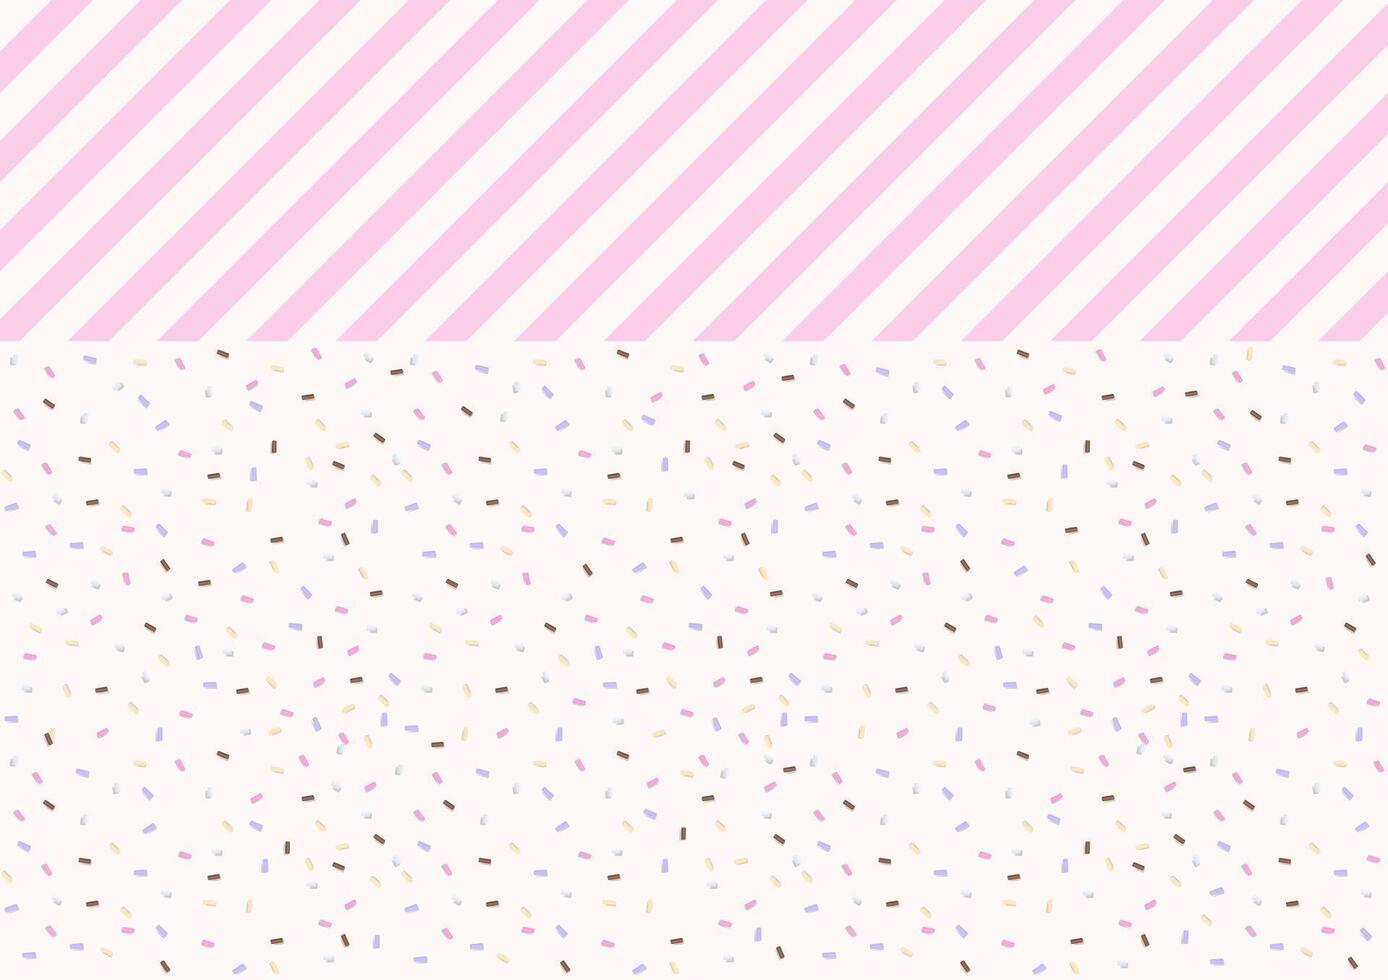 Sugar sprinkles and striped background vector